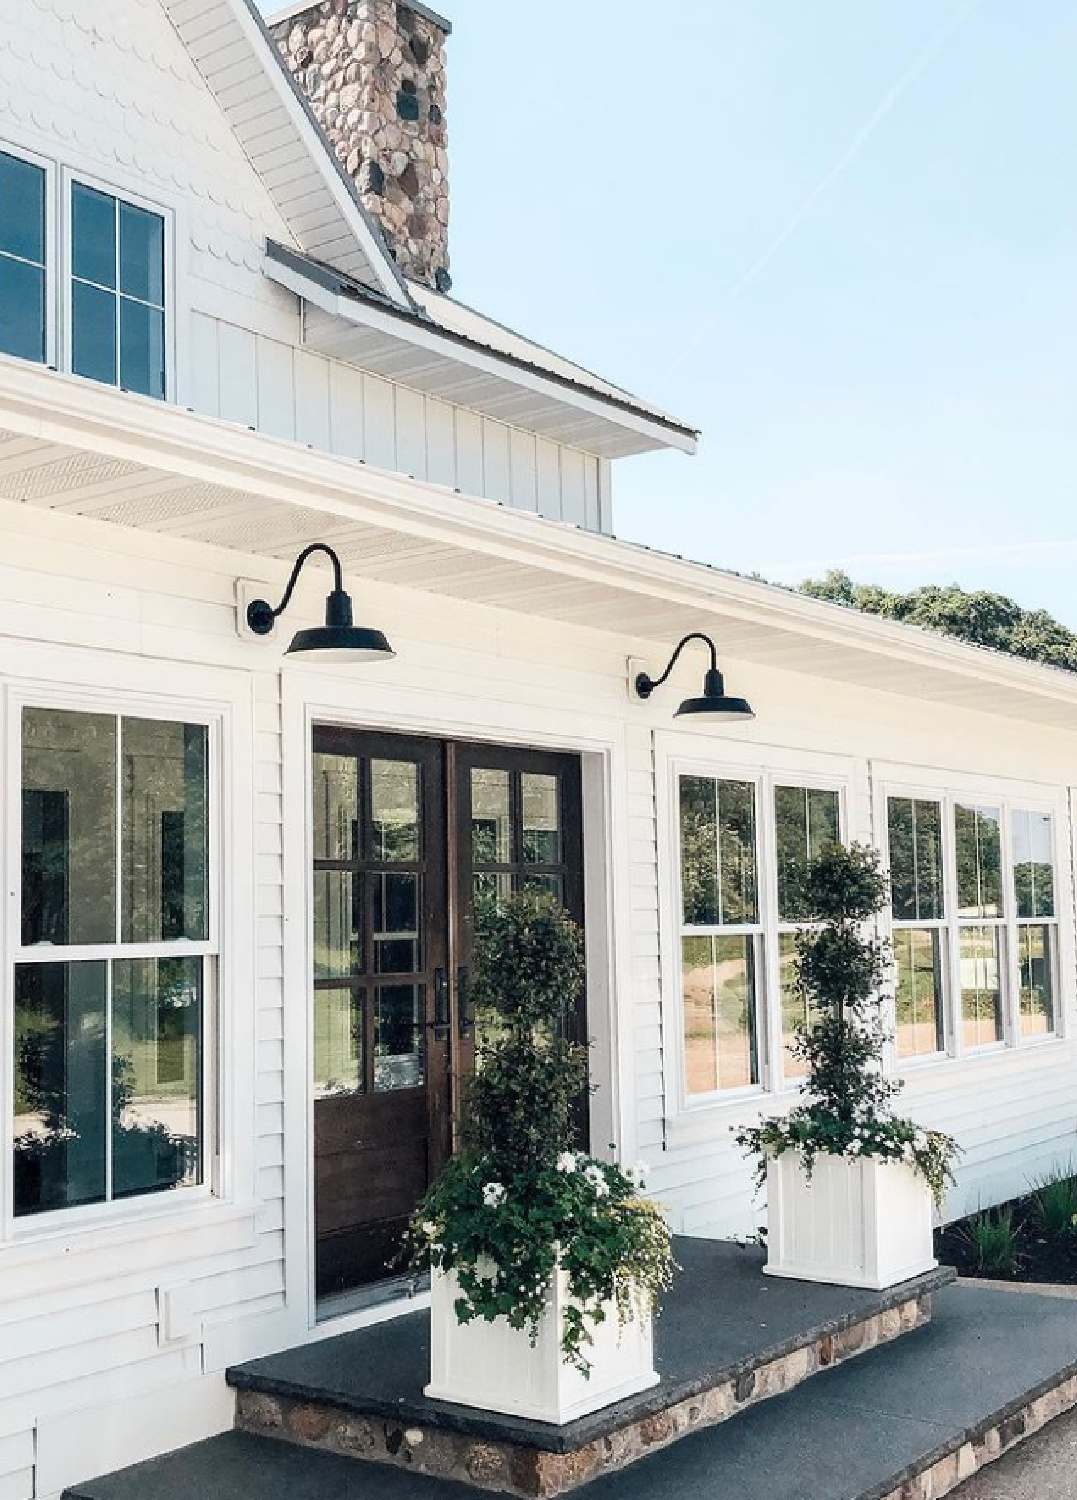 SW Pure White paint color on a beautiful farmhouse with black doors and topiaries on porch - @balance_and_bison. #swpurewhite #whitepaintcolors #houseexteriorpaint